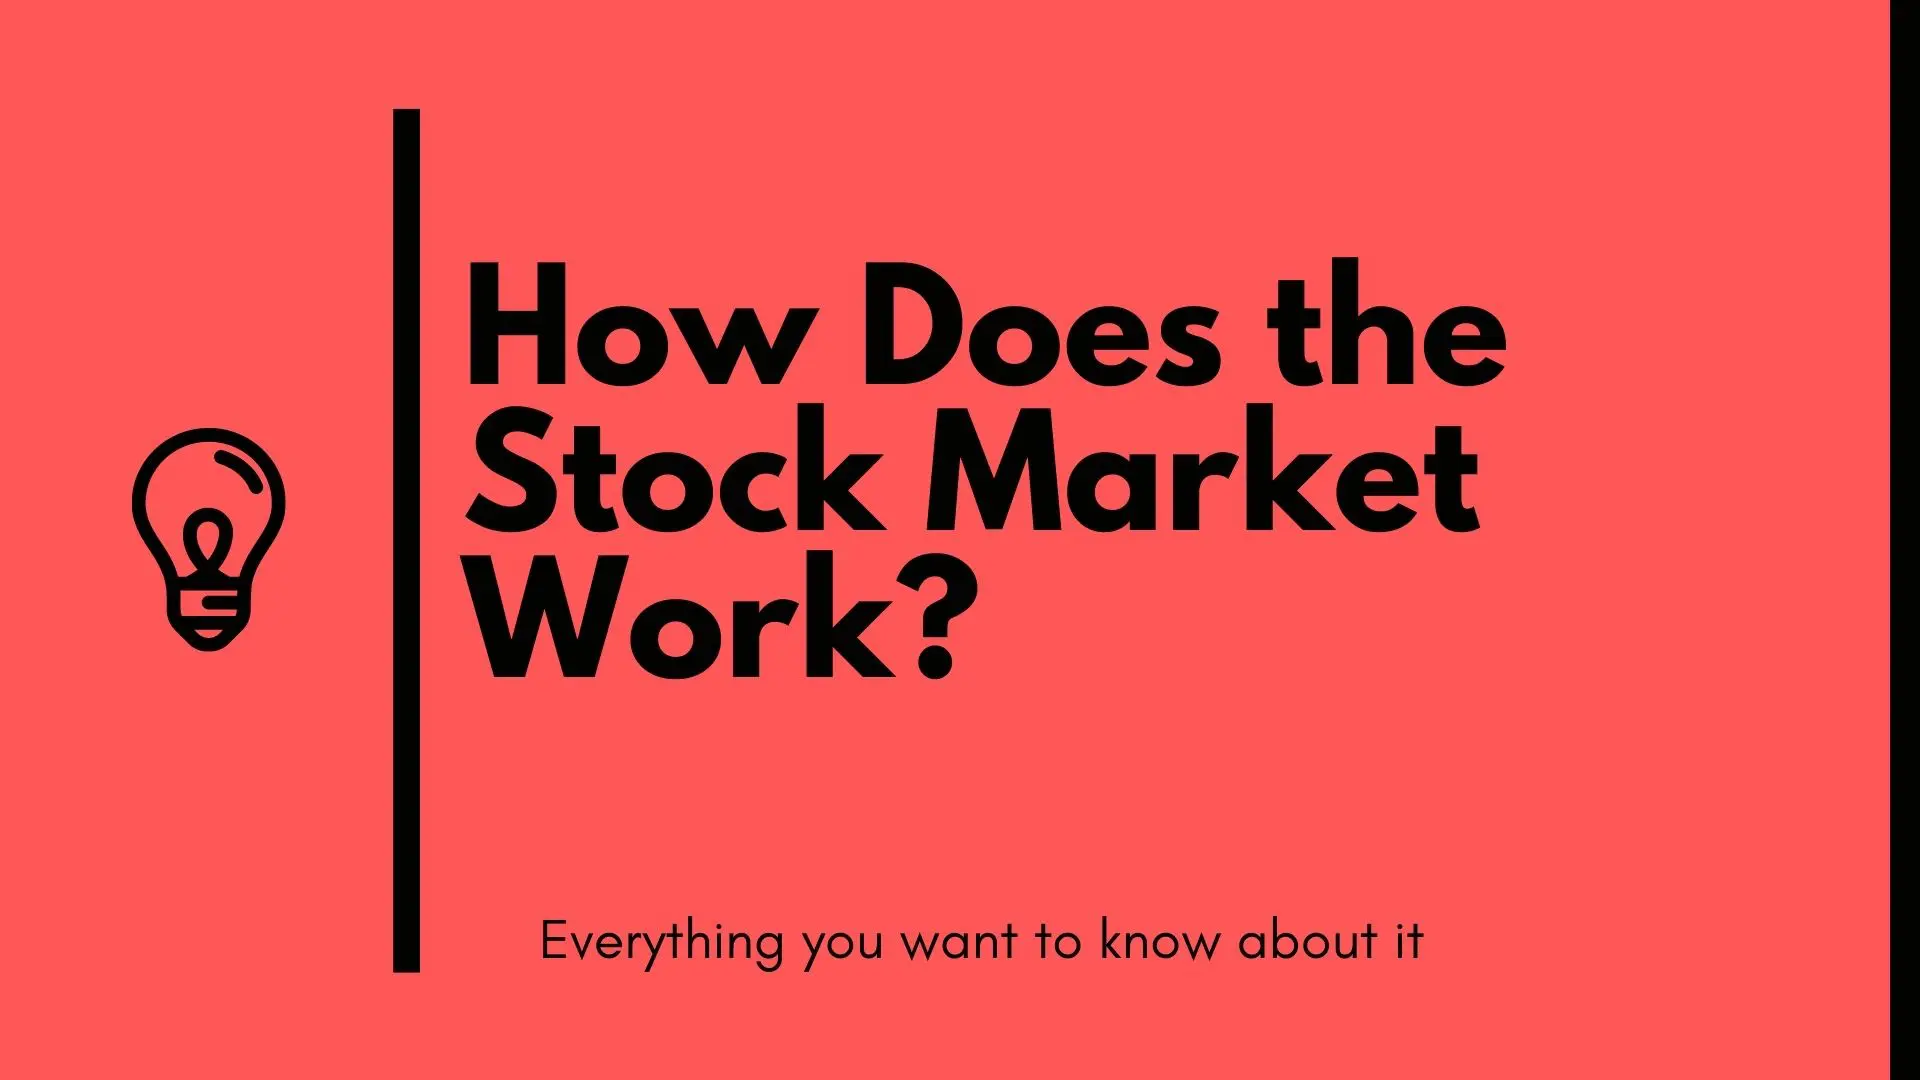 How Does the Stock Market Work